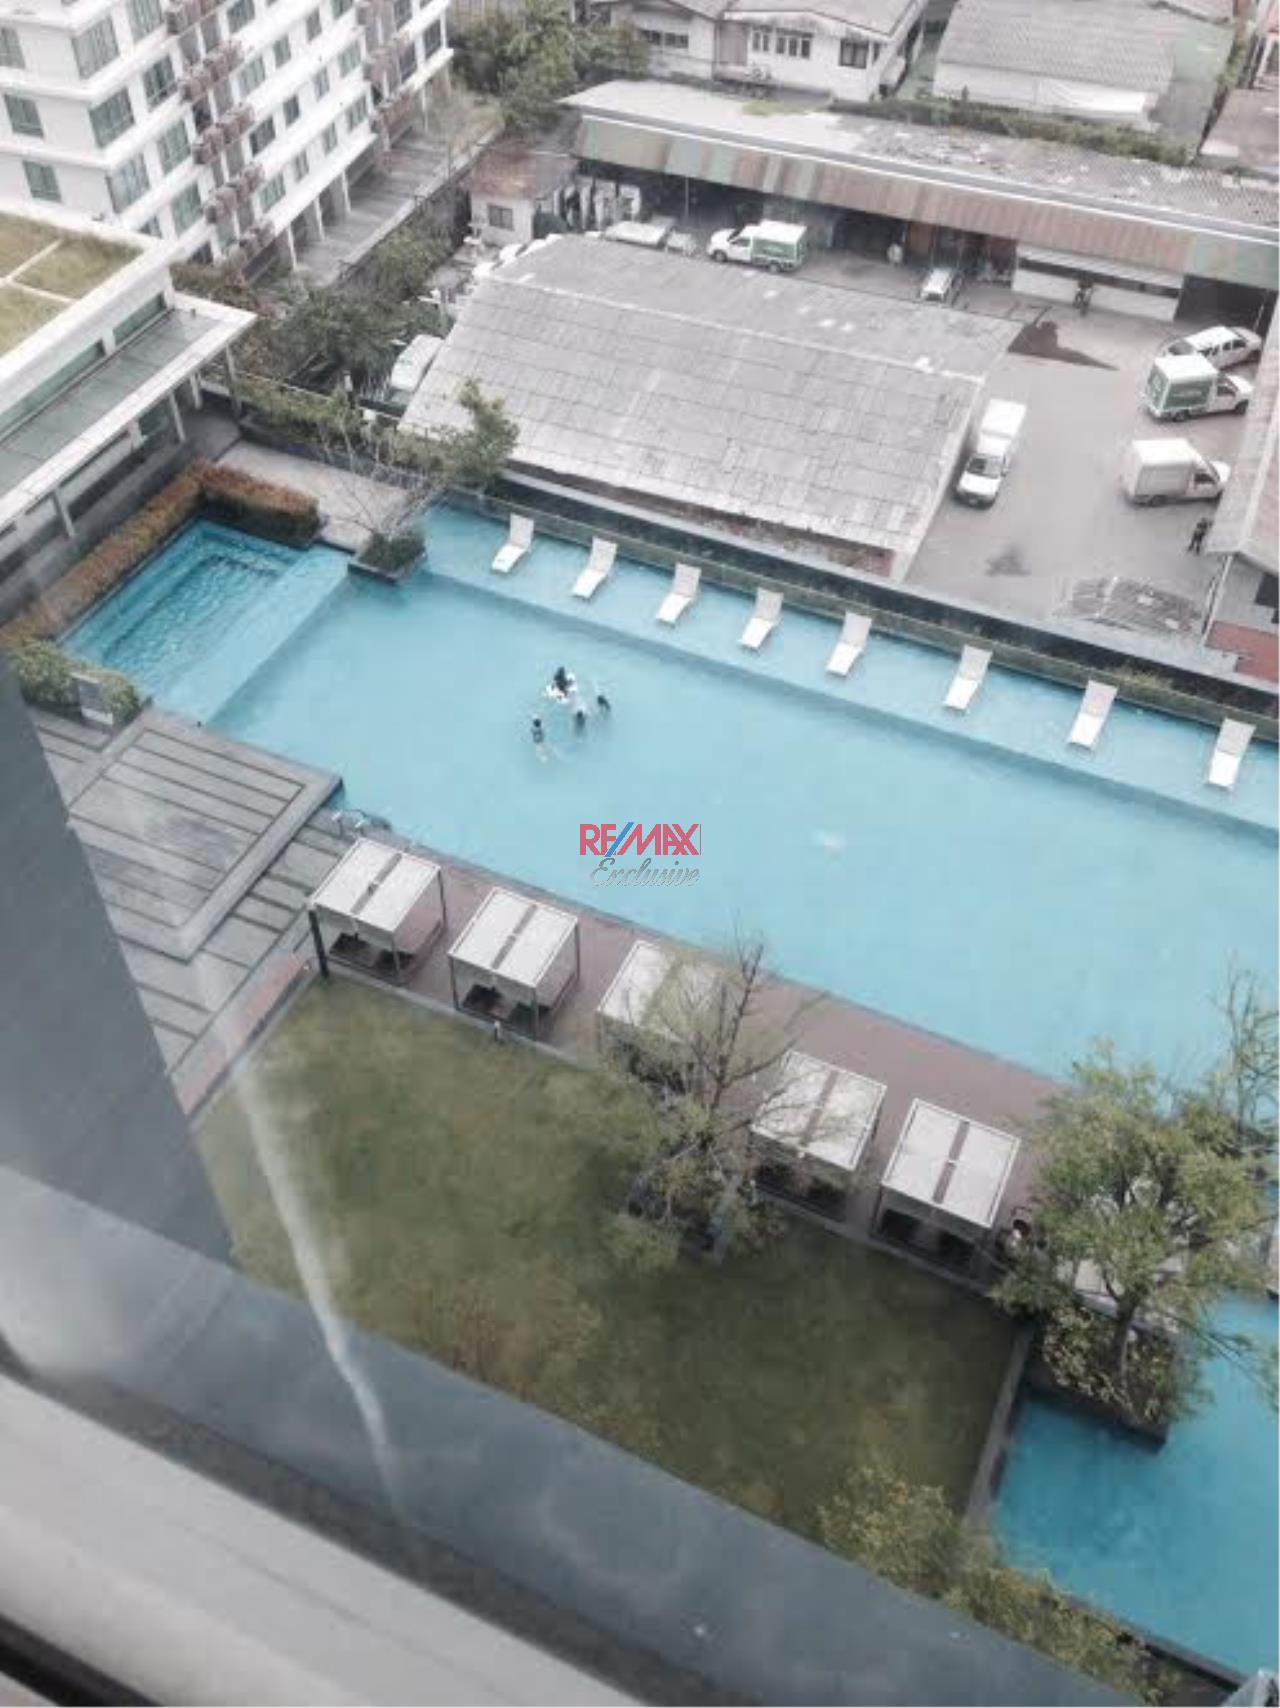 RE/MAX Exclusive Agency's Siri@Sukhumvit, 1 bedroom, 1 bathroom, Only For Sale 13,500,000 THB 5